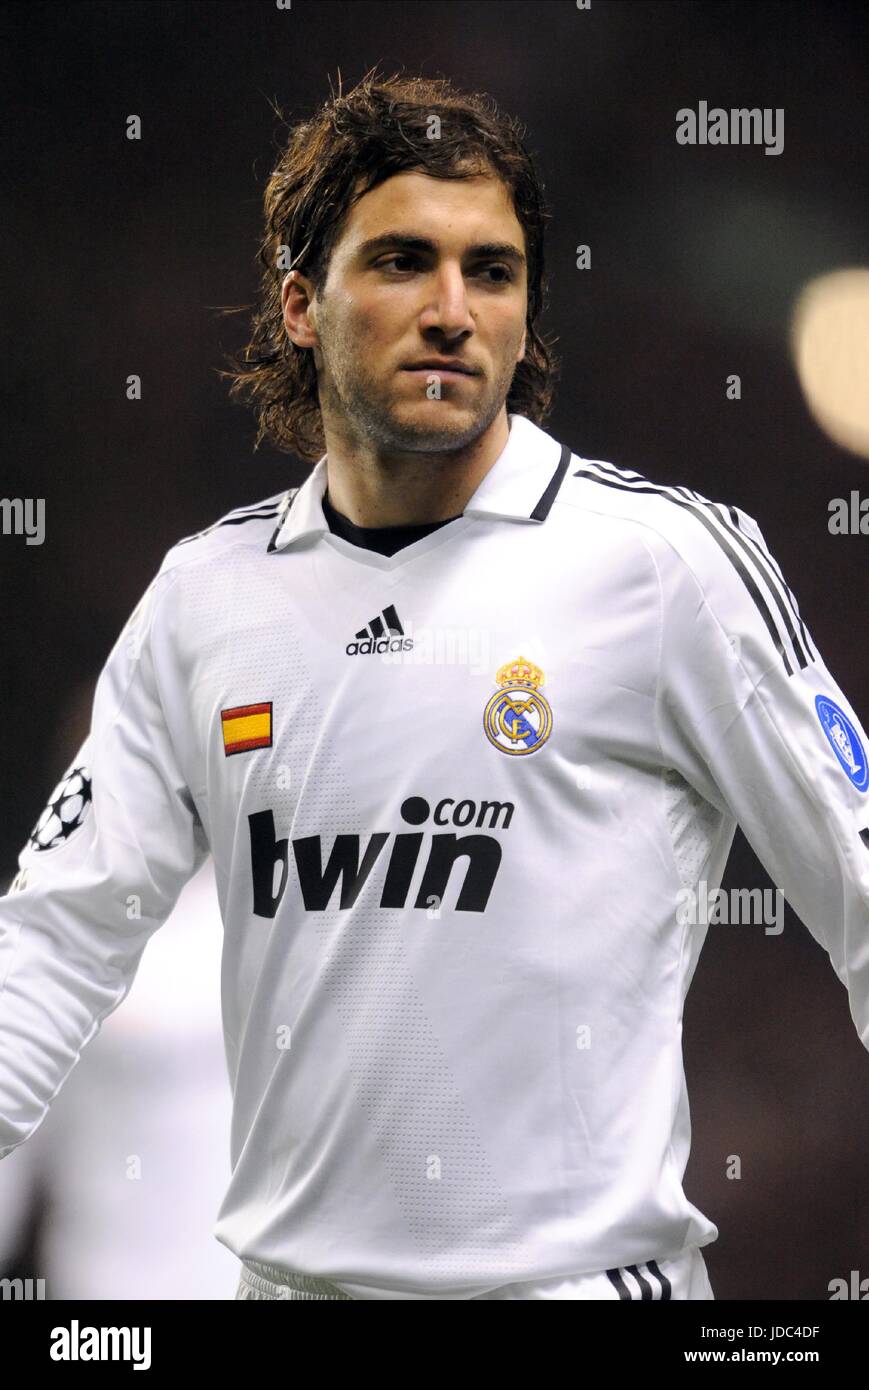 GONZALO HIGUAIN REAL MADRID ANFIELD LIVERPOOL ENGLAND 10 March 2009 Stock Photo